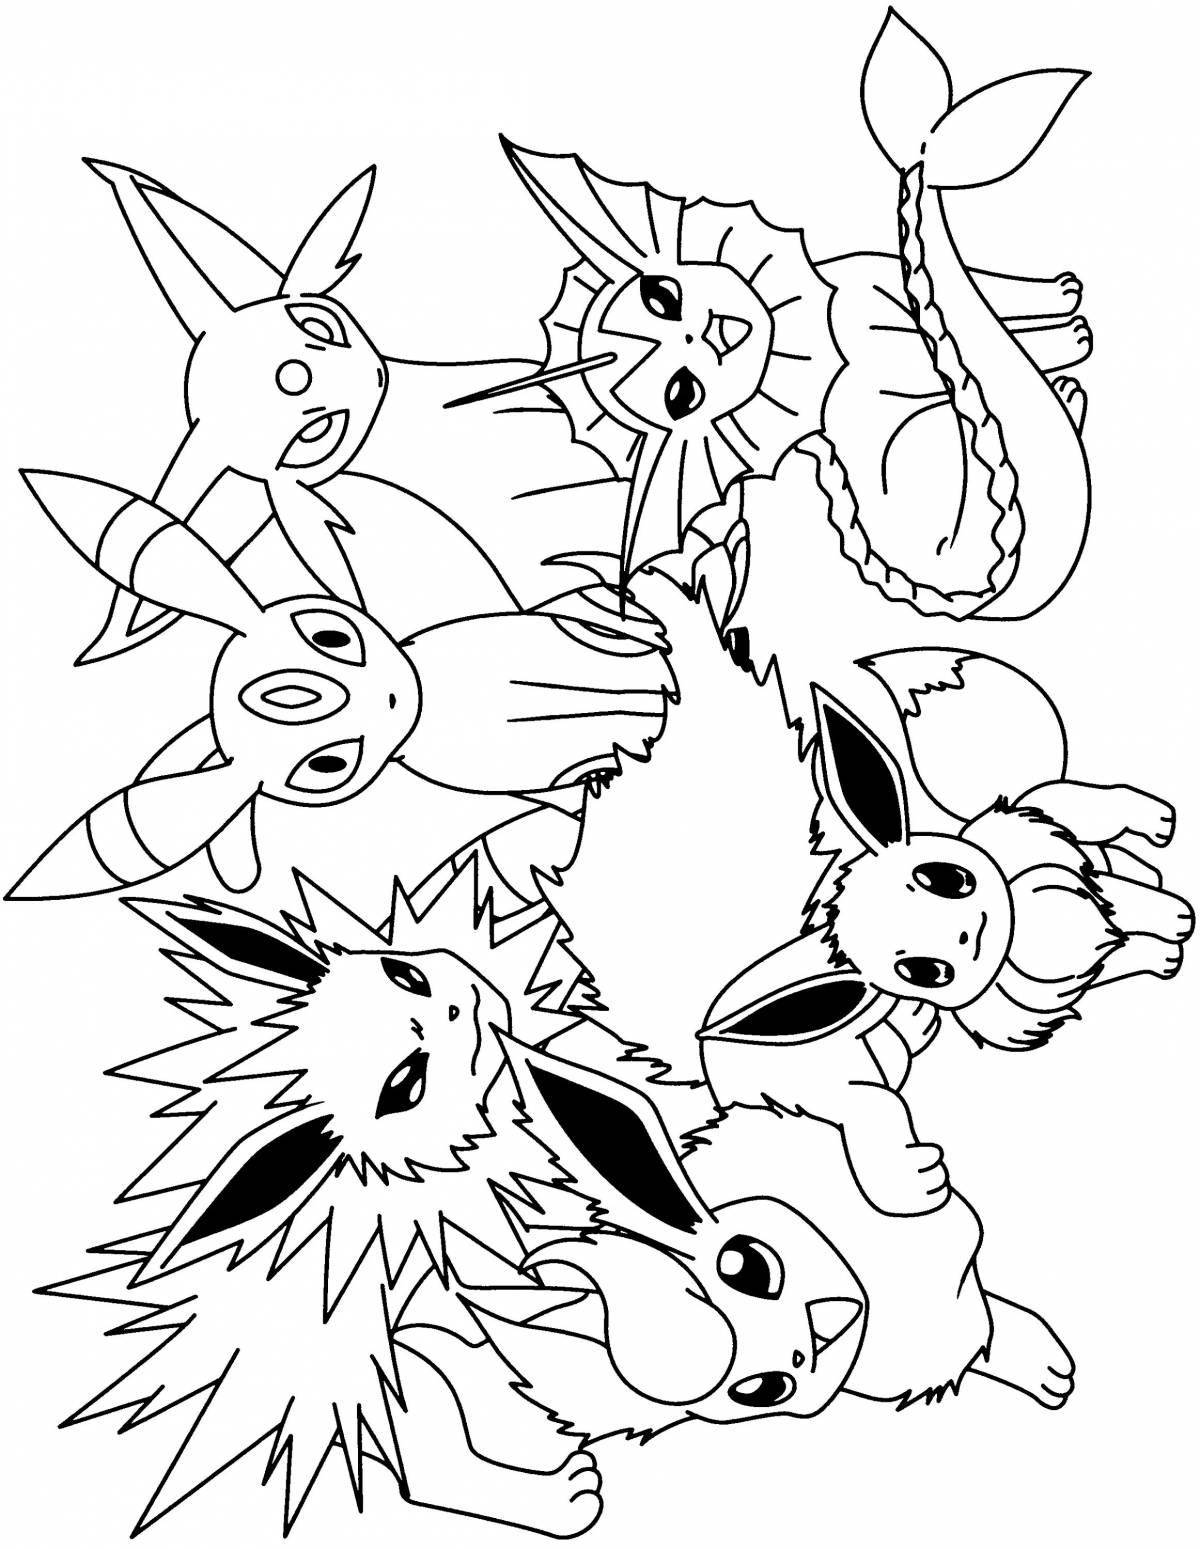 Fun Pokemon Coloring Pages